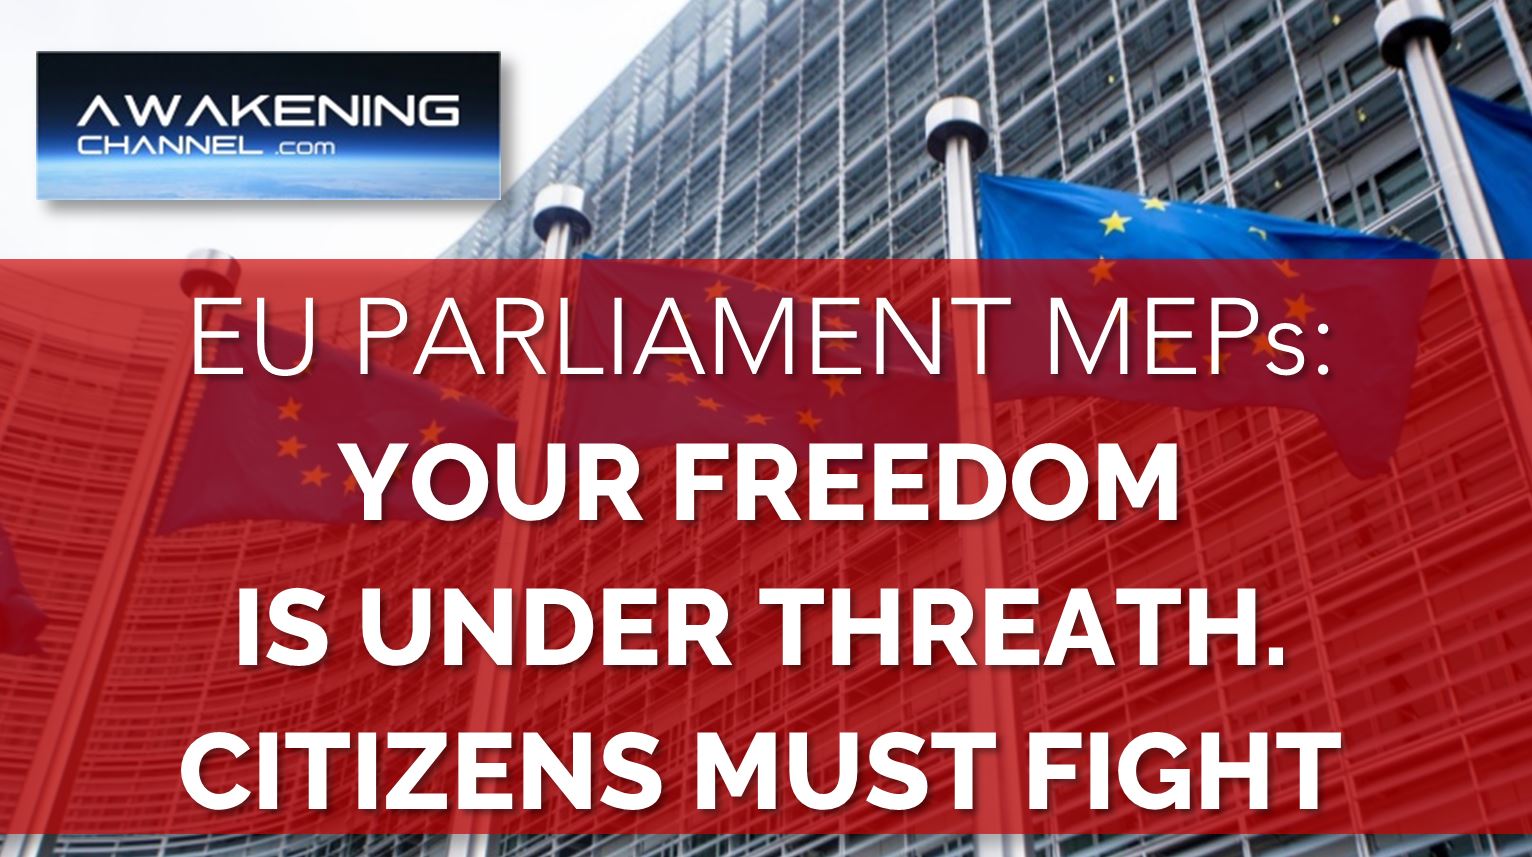 WARNING! (CV19) EU Parliament MEPs: YOUR FREEDOM IS UNDER THREAT! CITIZENS MUST FIGHT!